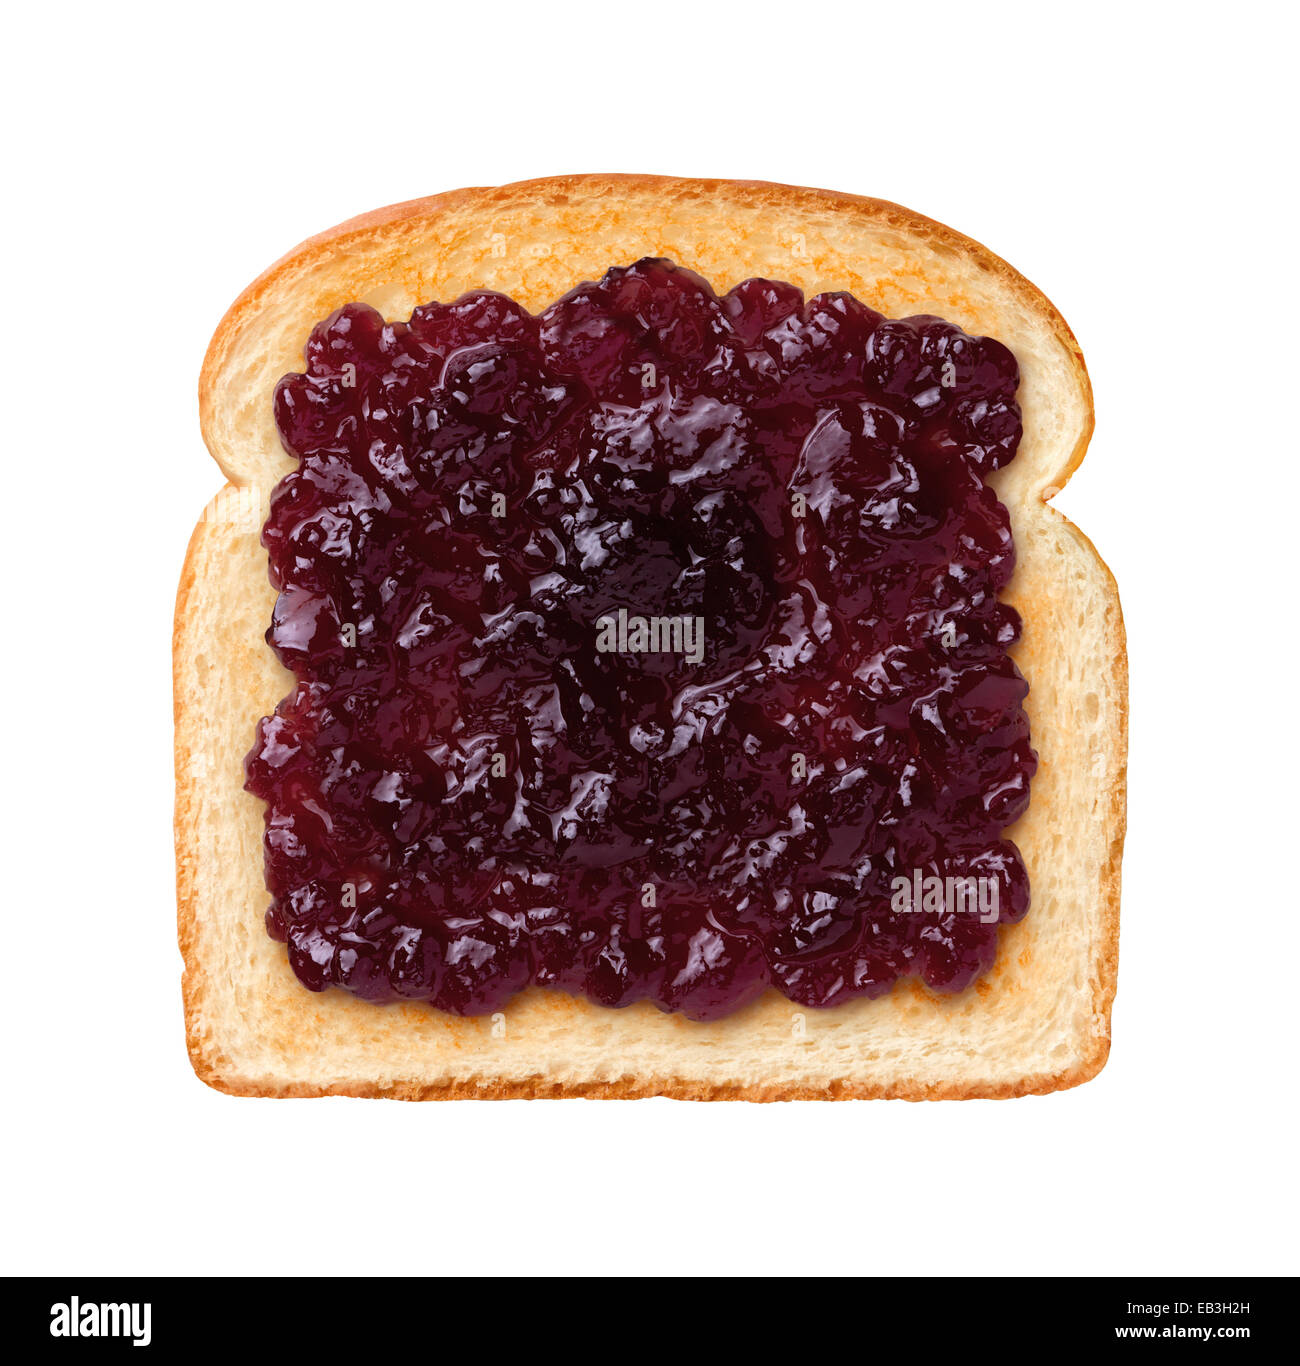 Aerial view of a single slice of Toast with grape jelly, or jam. Jelly is a sweet elastic spread made from fruit juice and sugar Stock Photo